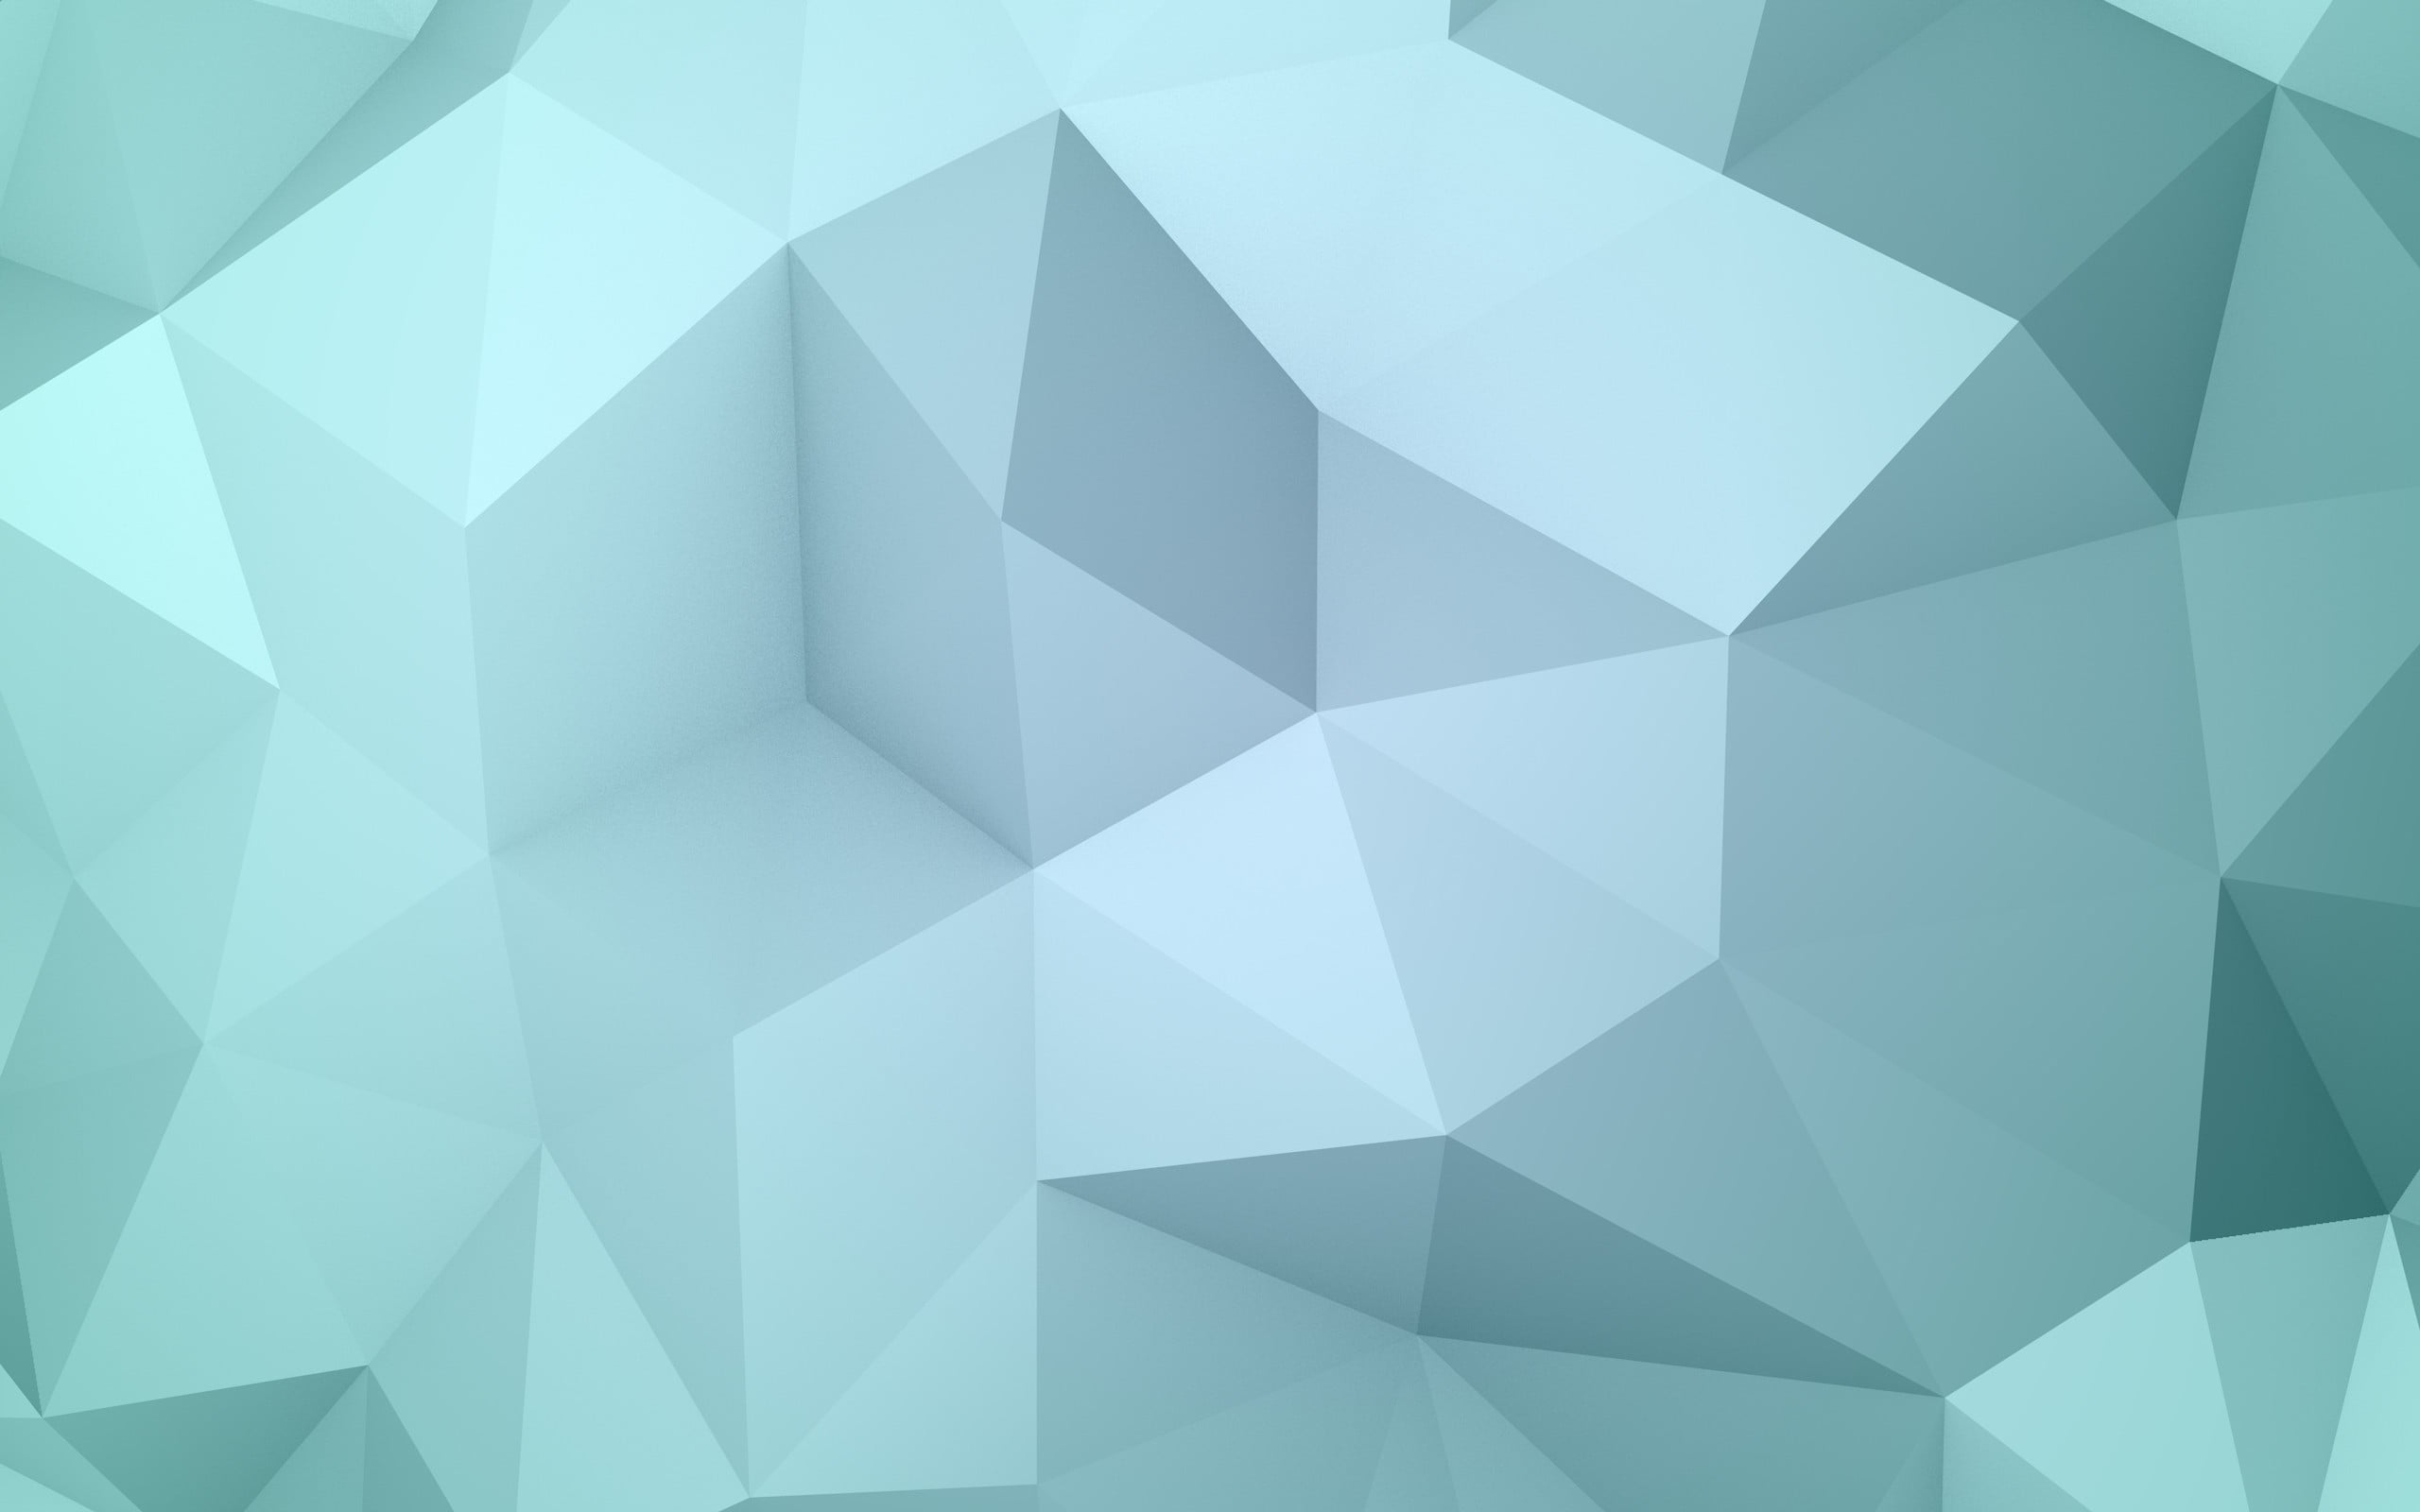 A white and blue abstract wallpaper - Low poly